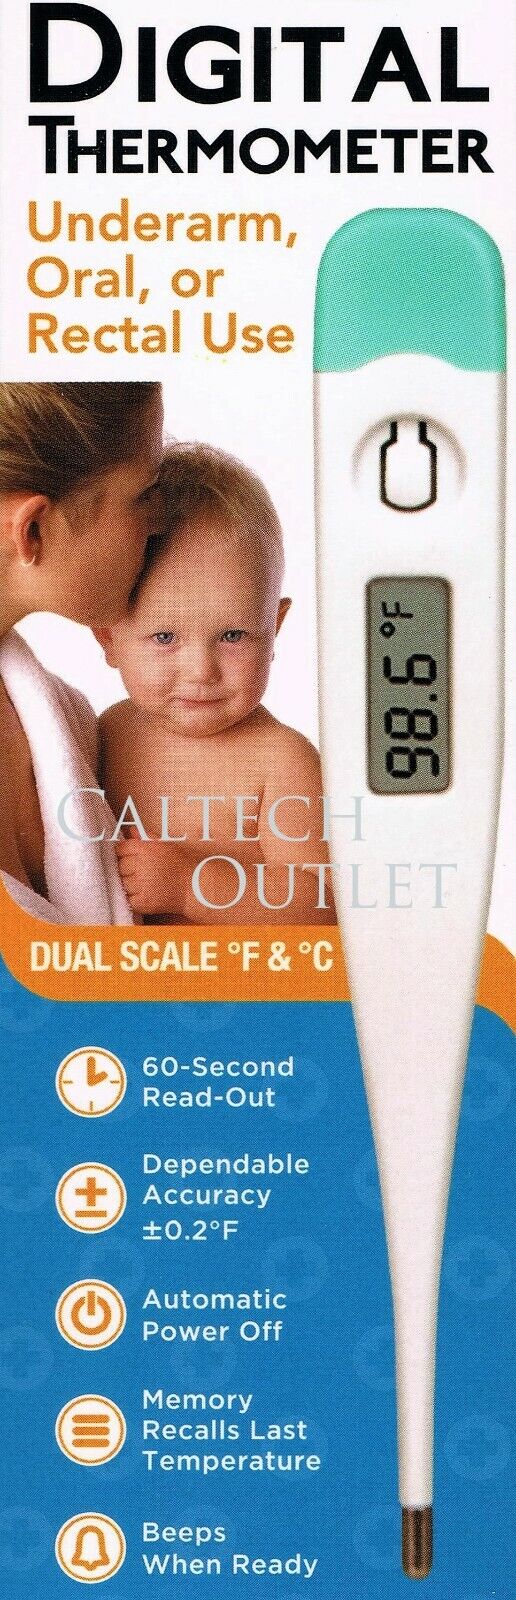 Digital LCD Medical Clinical Body Thermometer Measure Temperature Child & Adult Family Care 780707005729